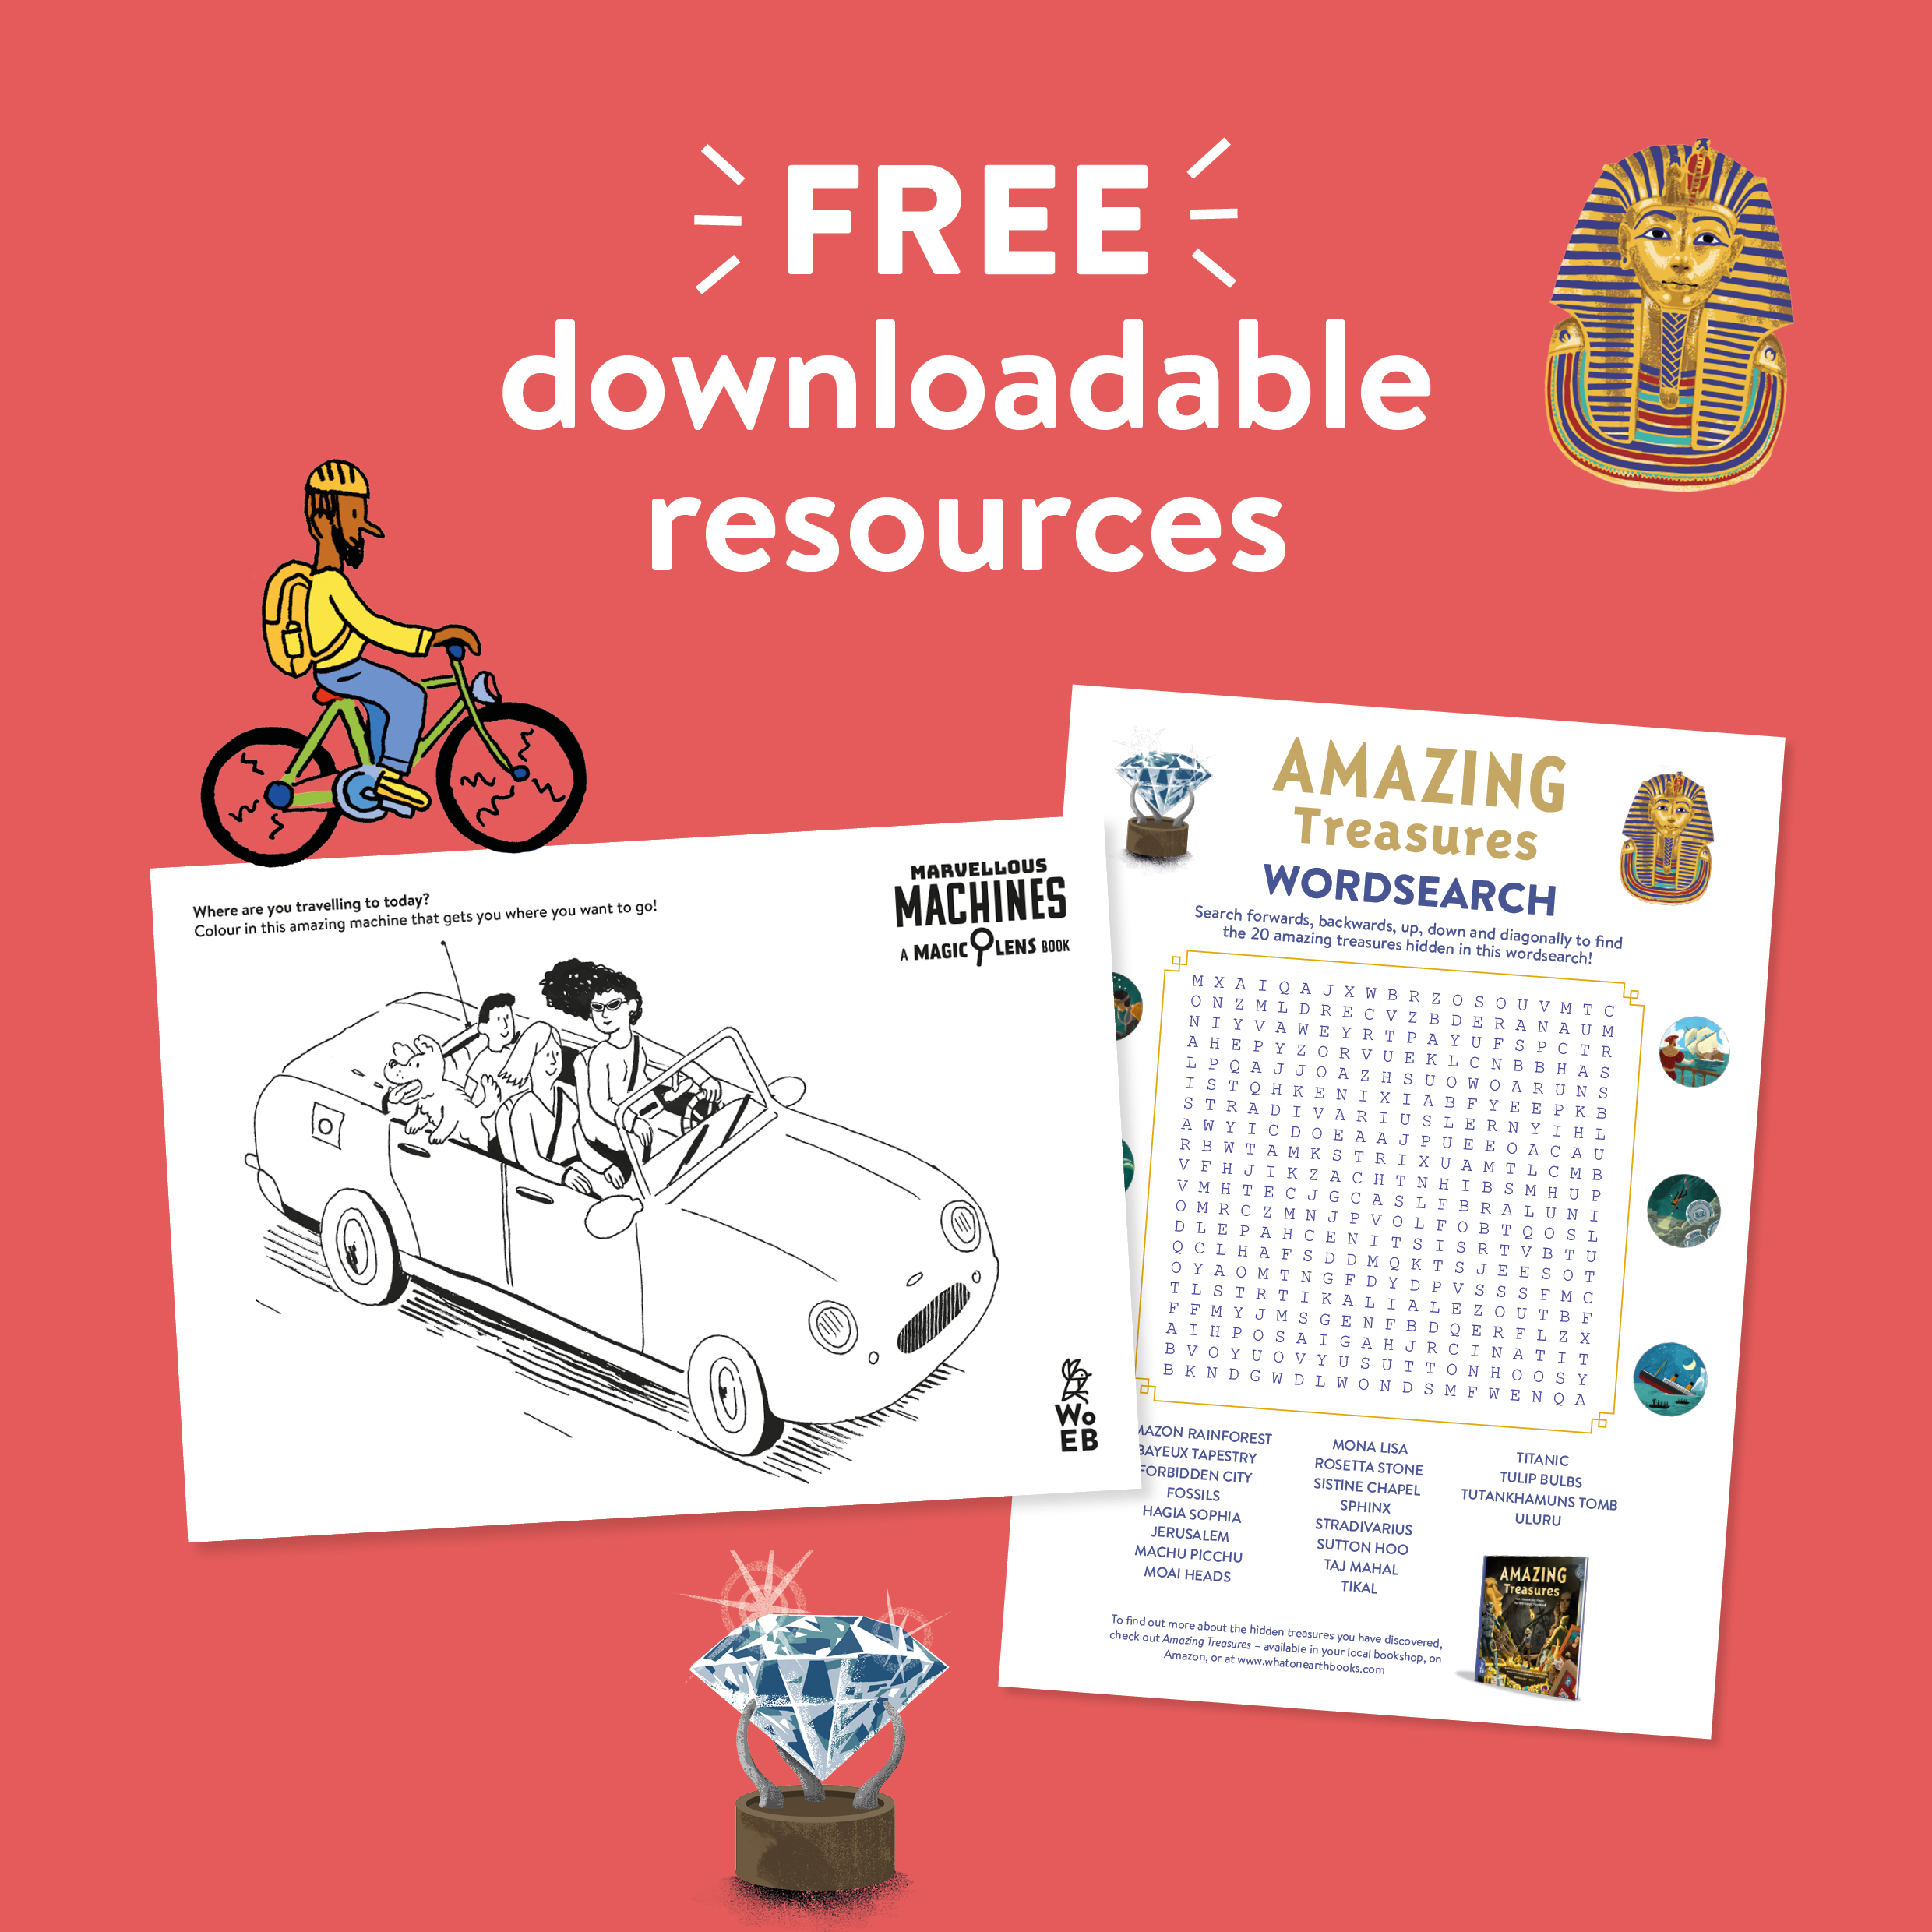 Free Downloadable Resources!